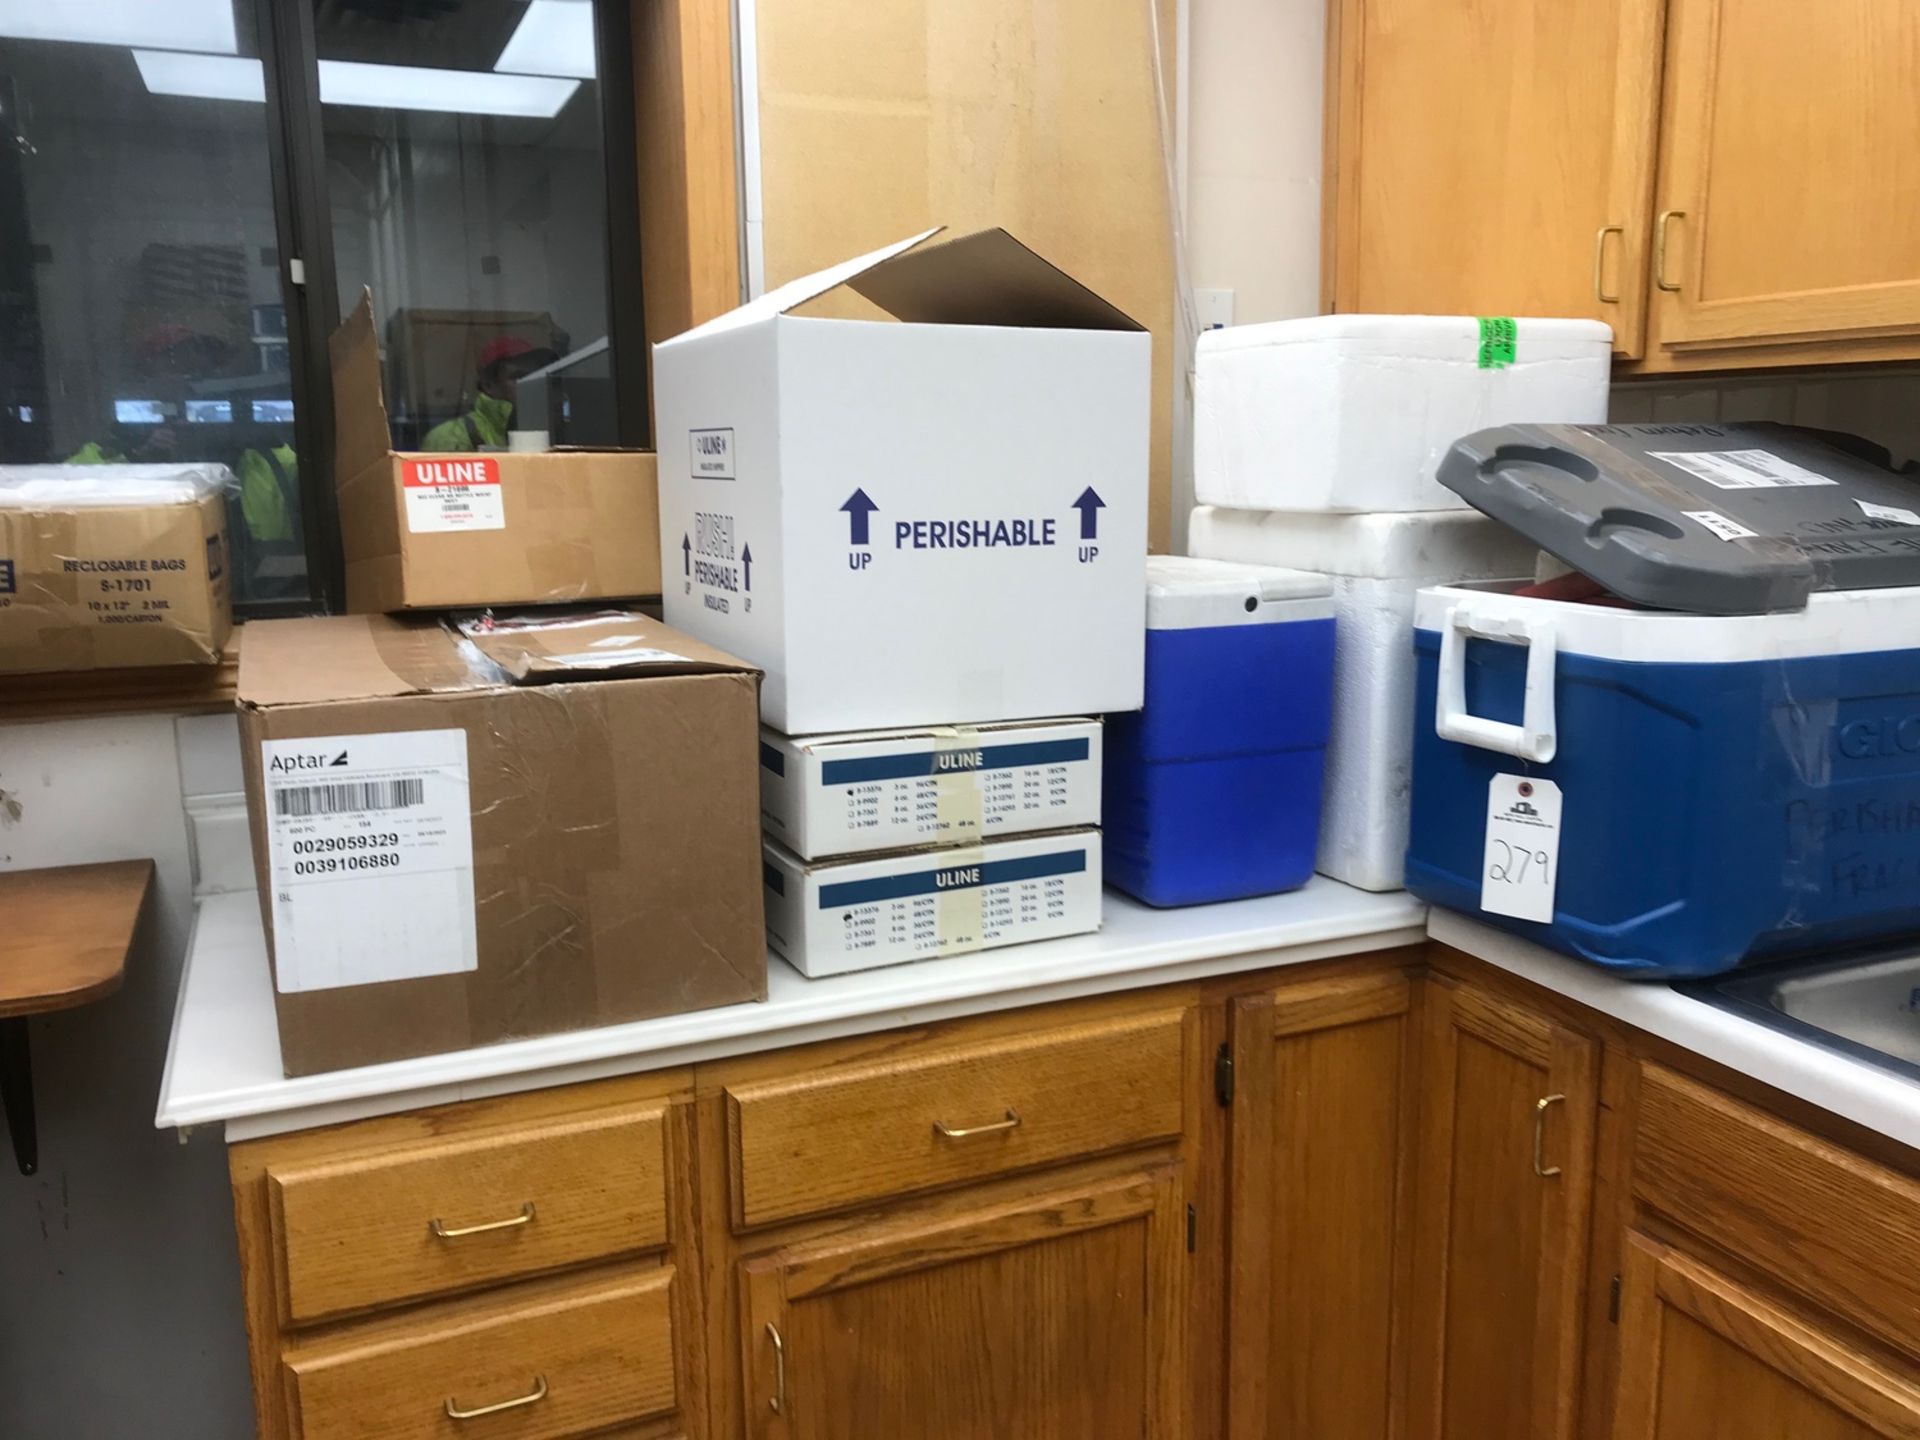 Lot of Lab Equipment, Syringes, Coolers, Rubber Gloves, Hair Nets, Ear Plugs and Bags (Cabinets